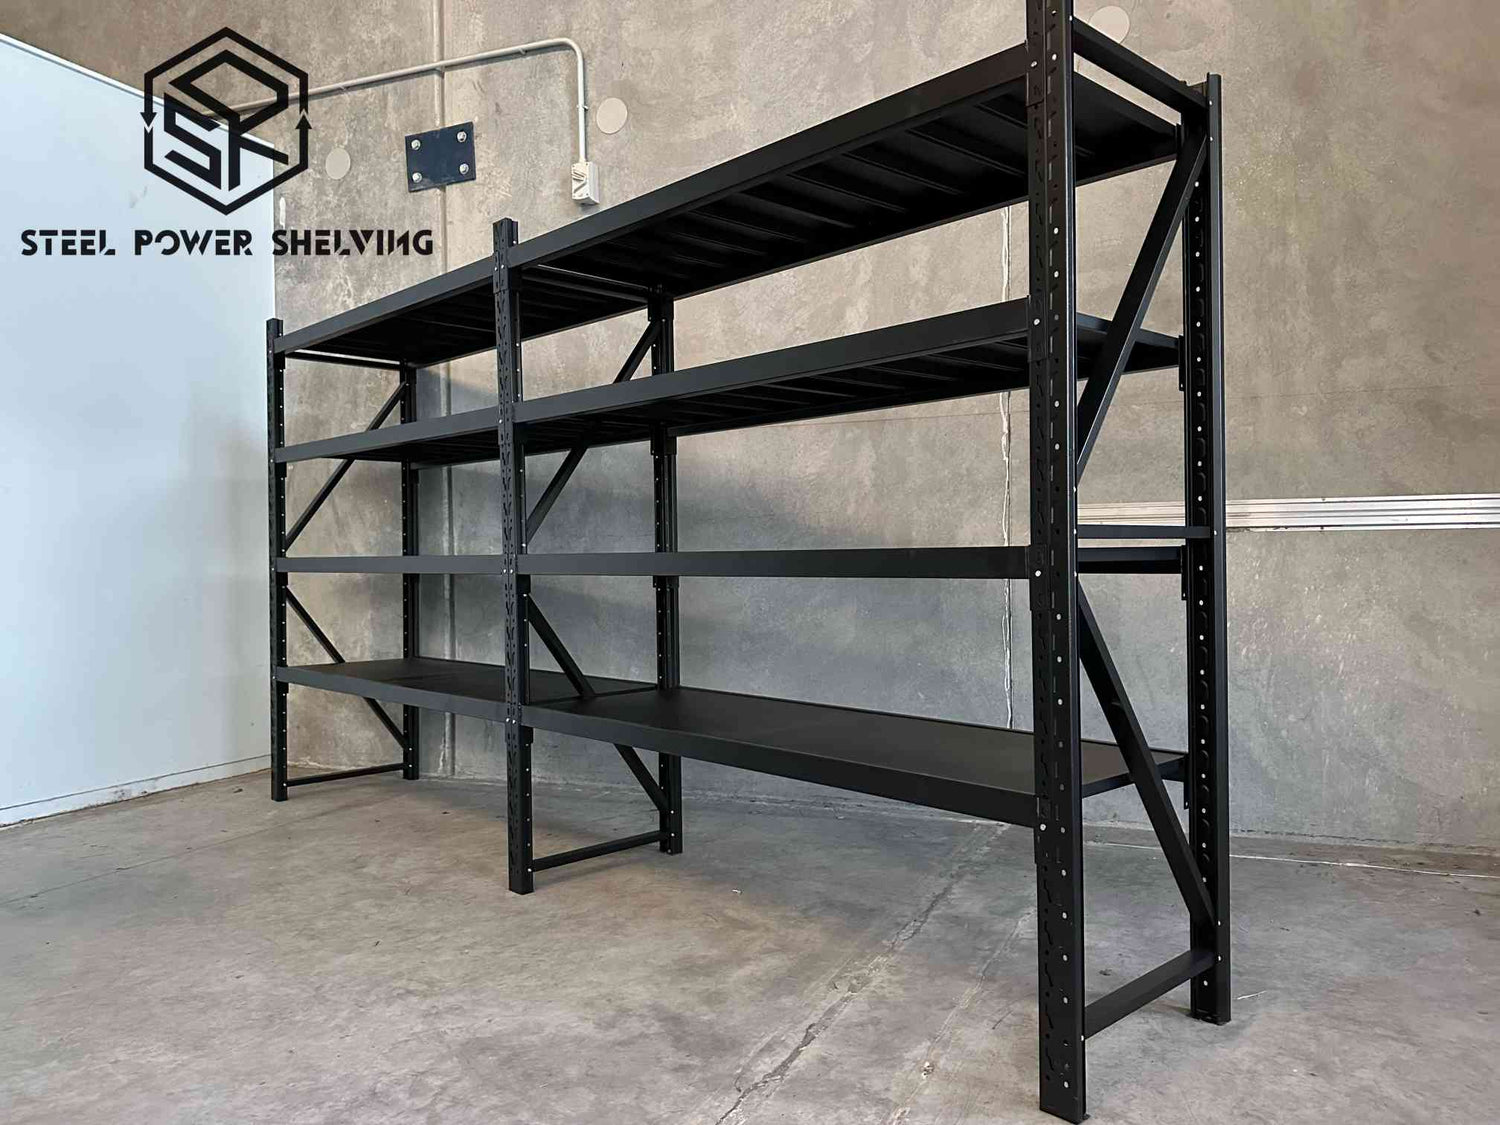 7 Shelving Unit Ideas for Australian Homes and Businesses